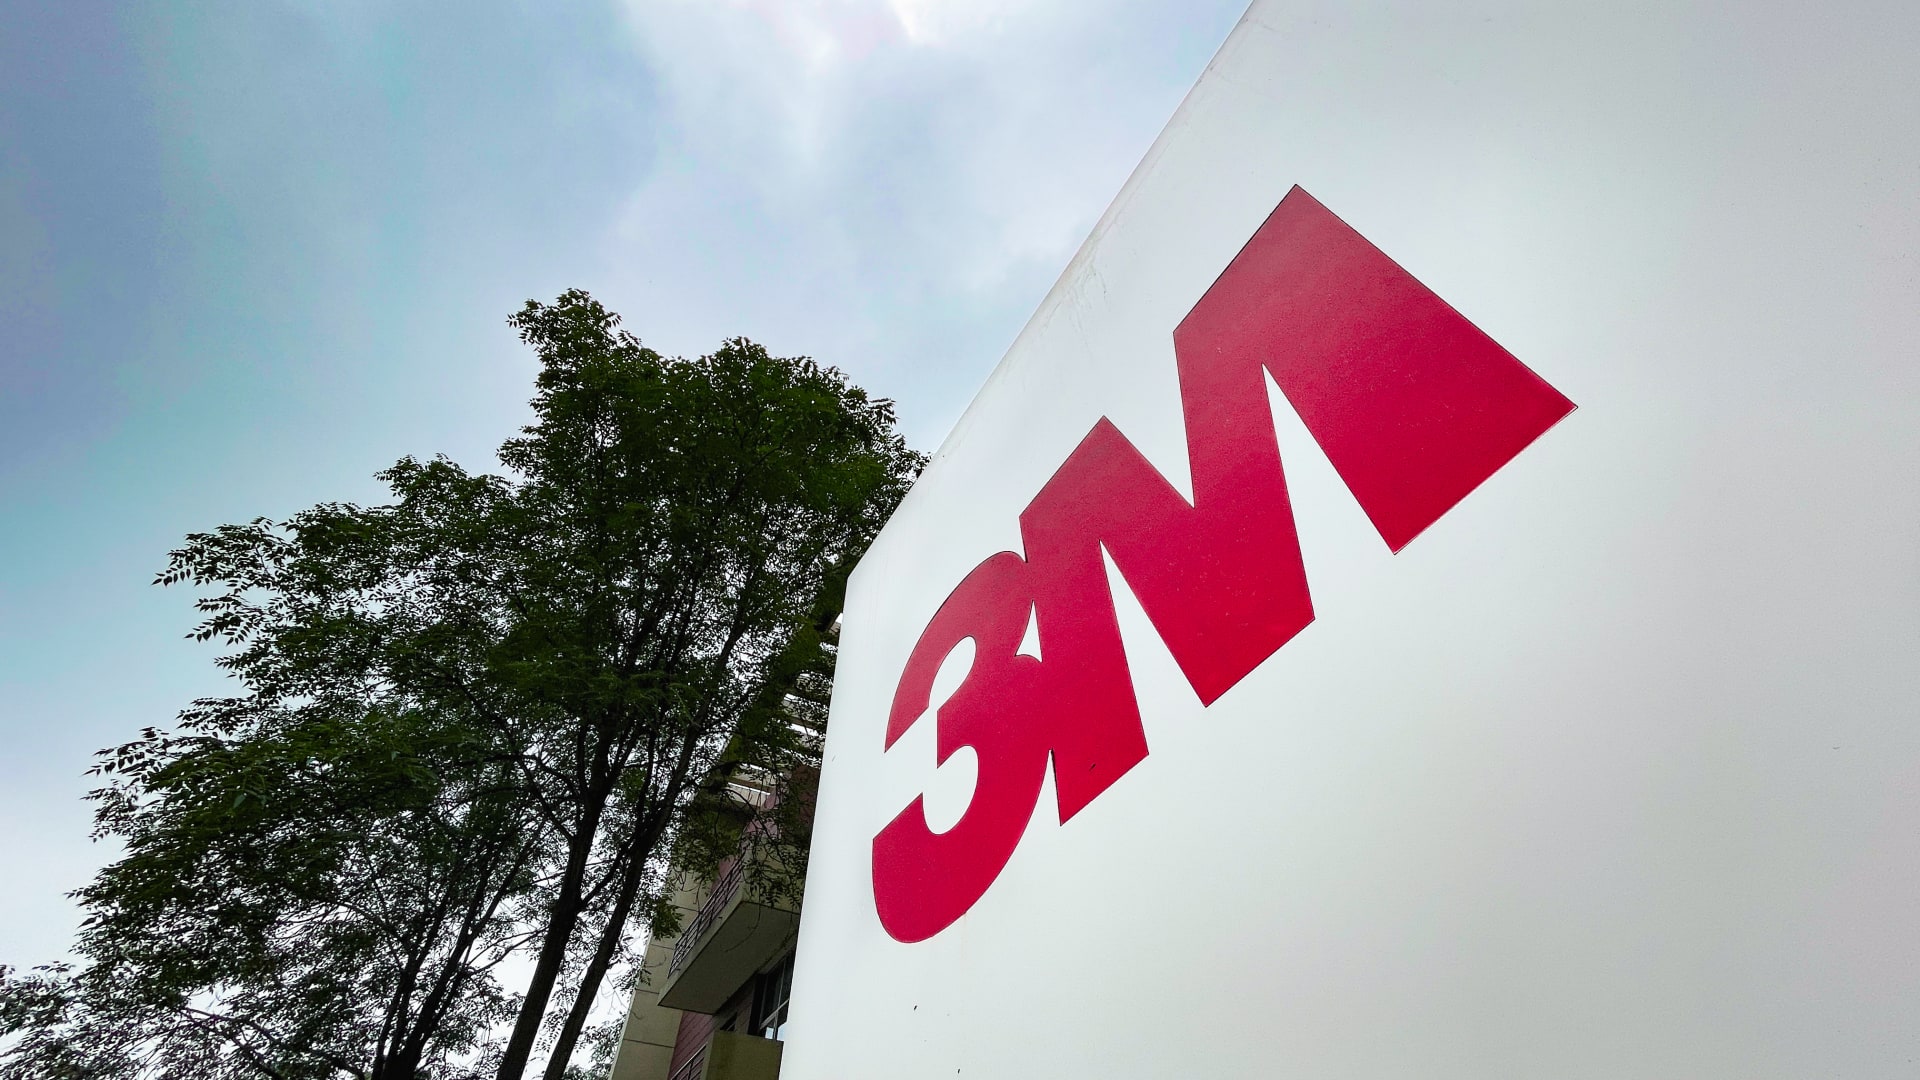 3M agrees to pay $6 billion to settle lawsuits over U.S. military earplugs